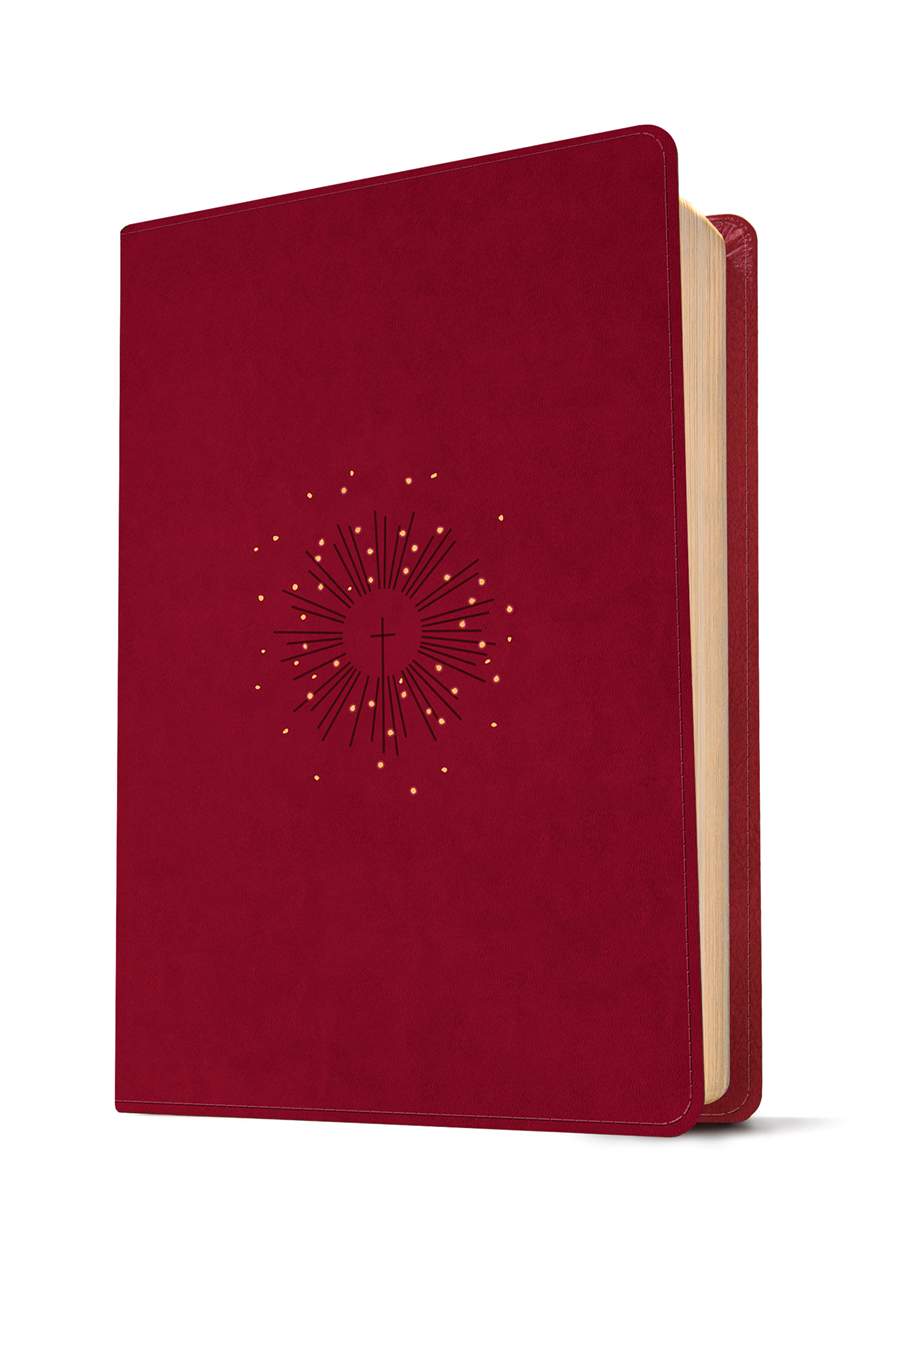 NLT Personal Size Giant Print Bible, Filament-Enabled Edition (LeatherLike, Aurora Cranberry, Red Letter)